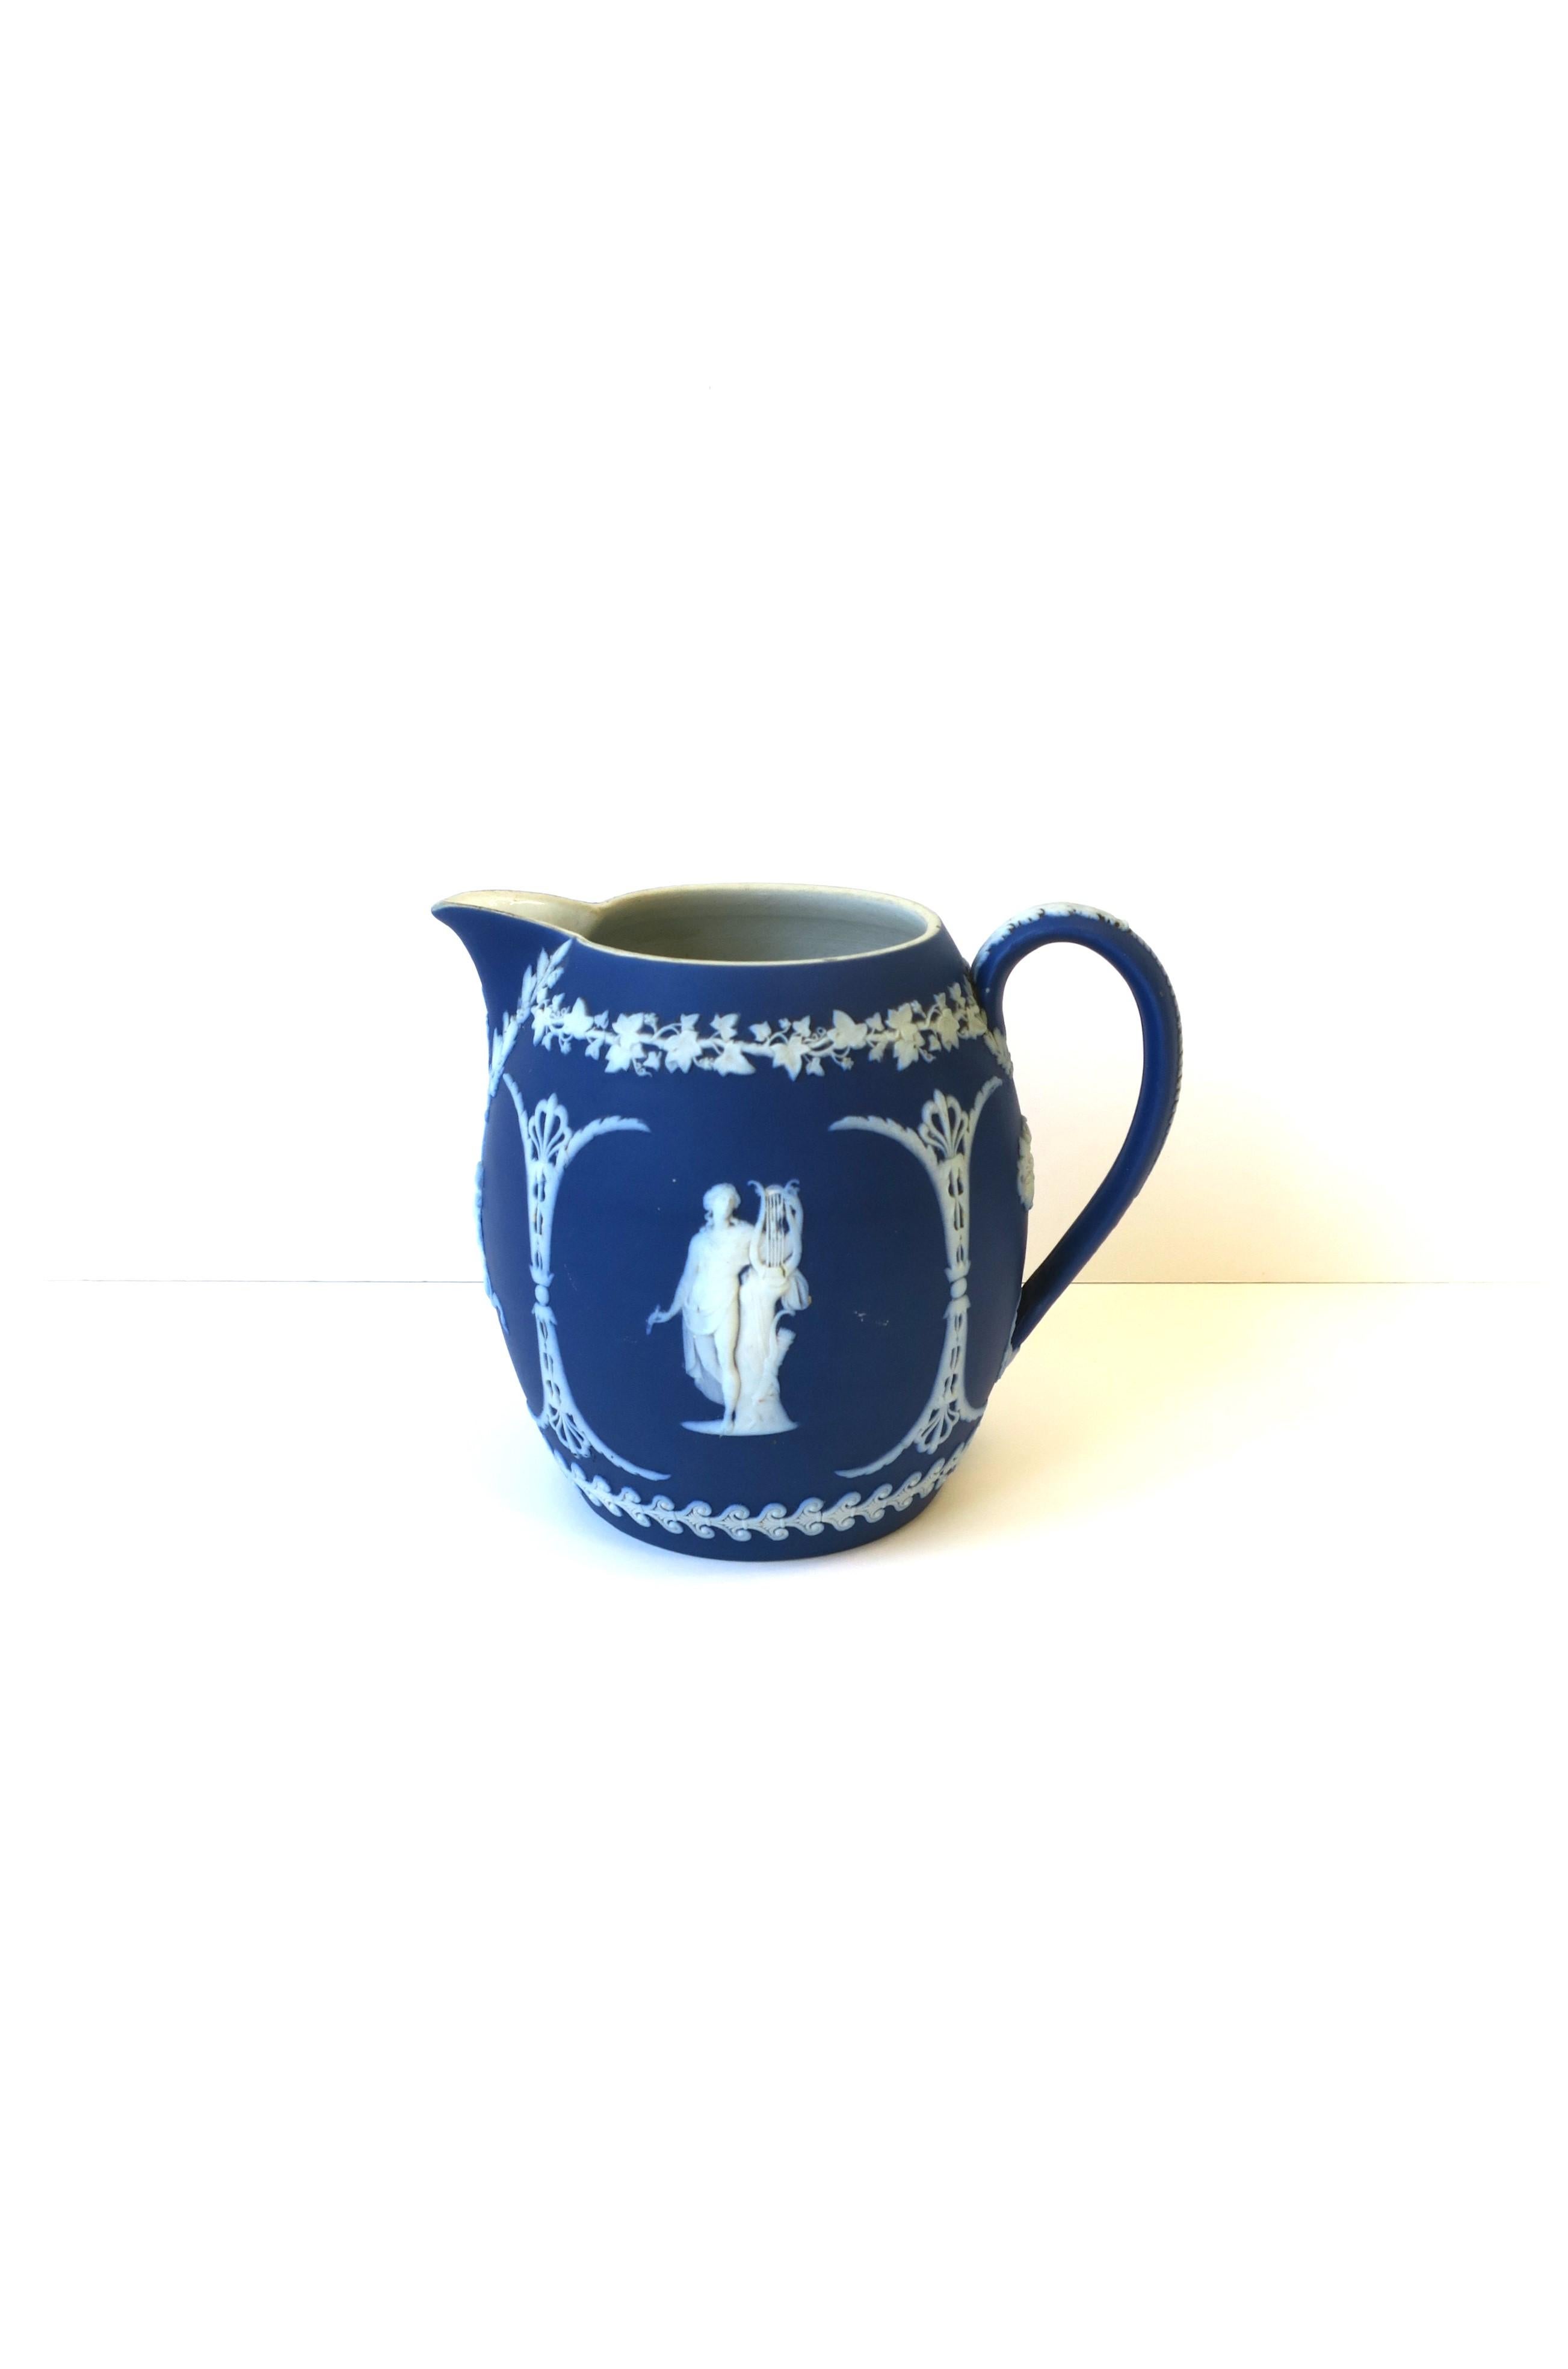 English Wedgwood Jasperware Blue and White Pitcher or Vase Neoclassical, England 19th C For Sale